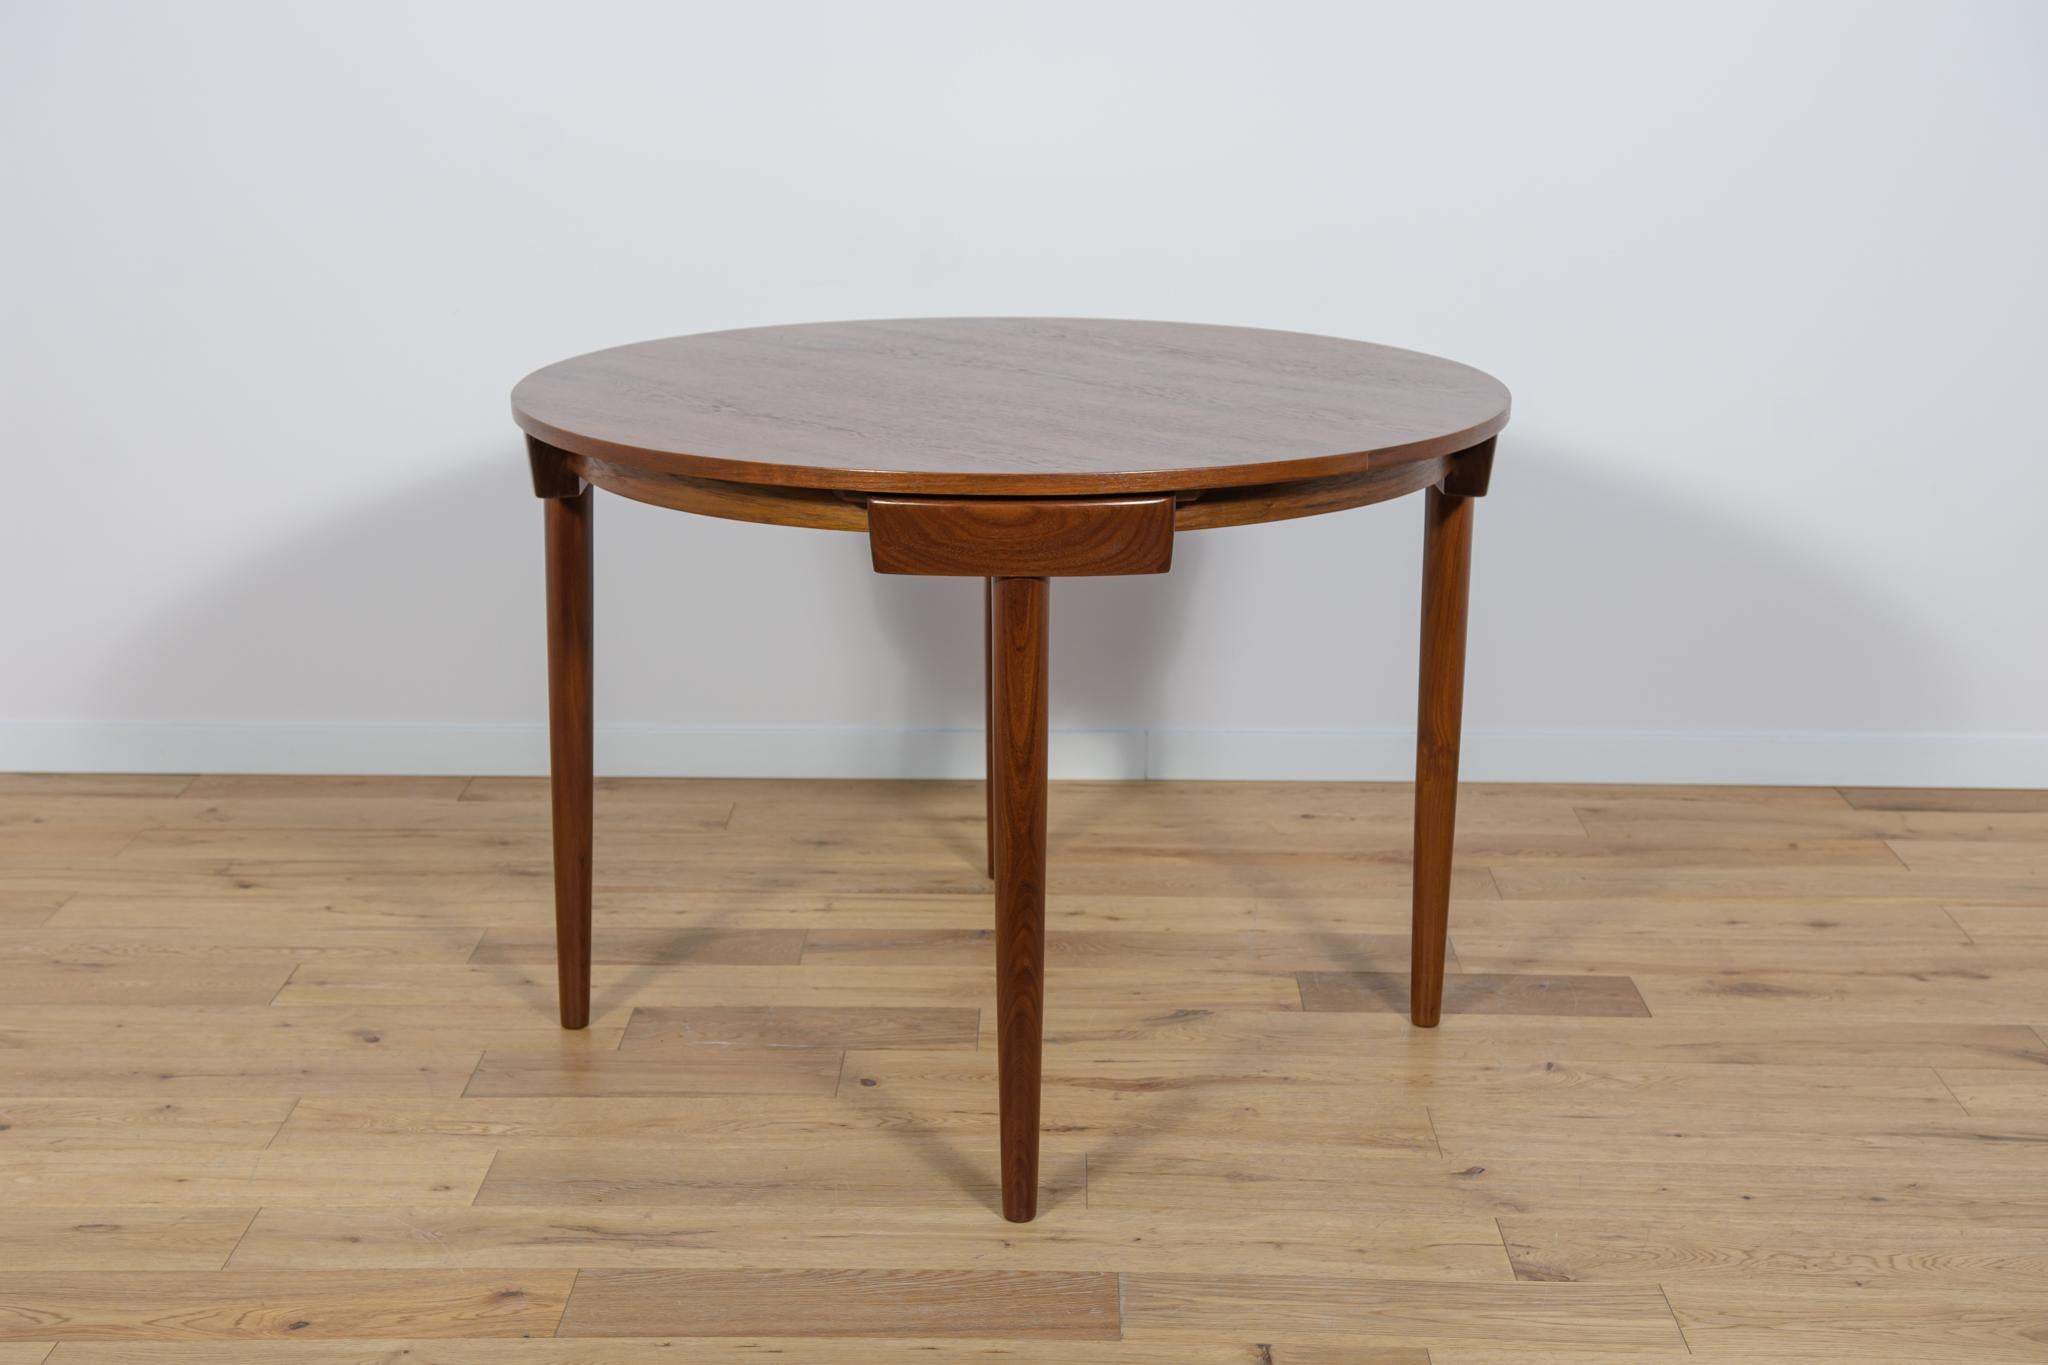 Mid-20th Century Mid-Century Teak Dining Table and Chairs Set by Hans Olsen for Frem Røjle, 1950s For Sale